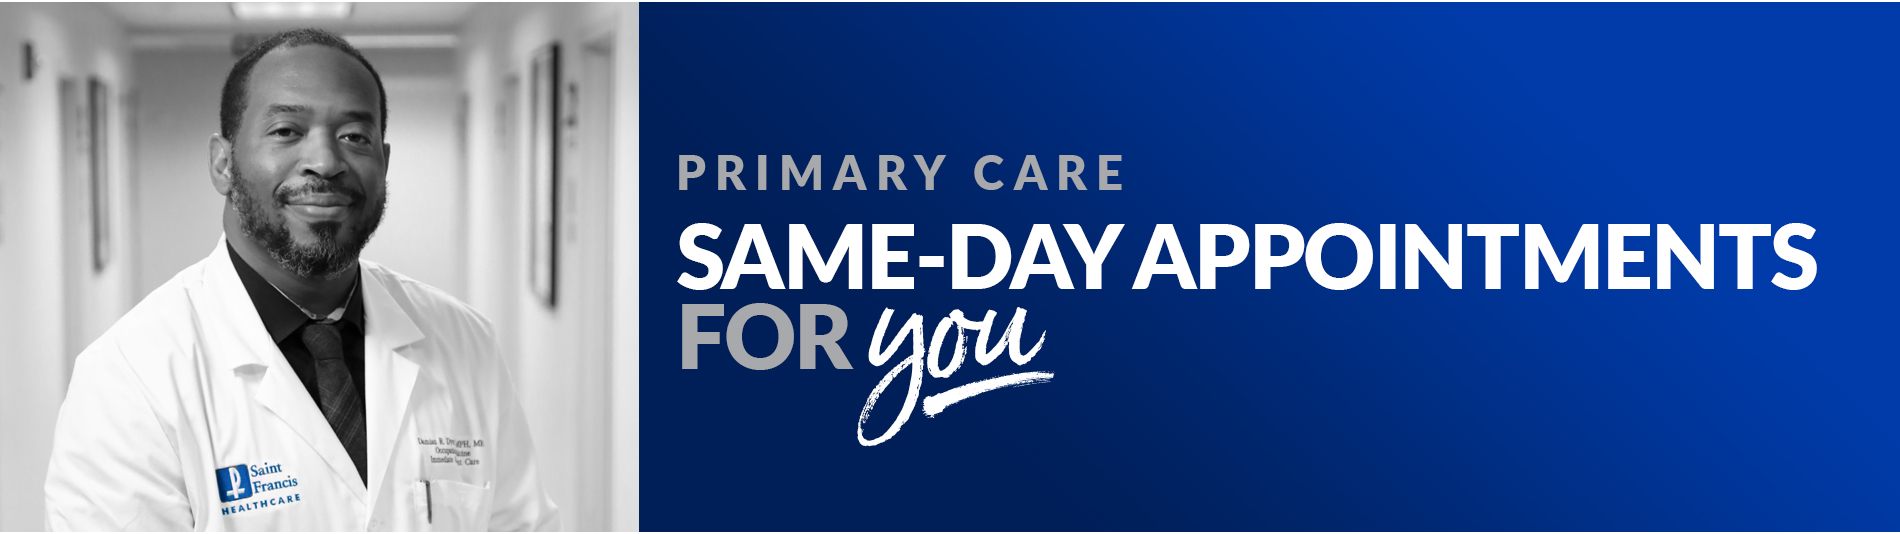 Primary care same day appointments for YOU!